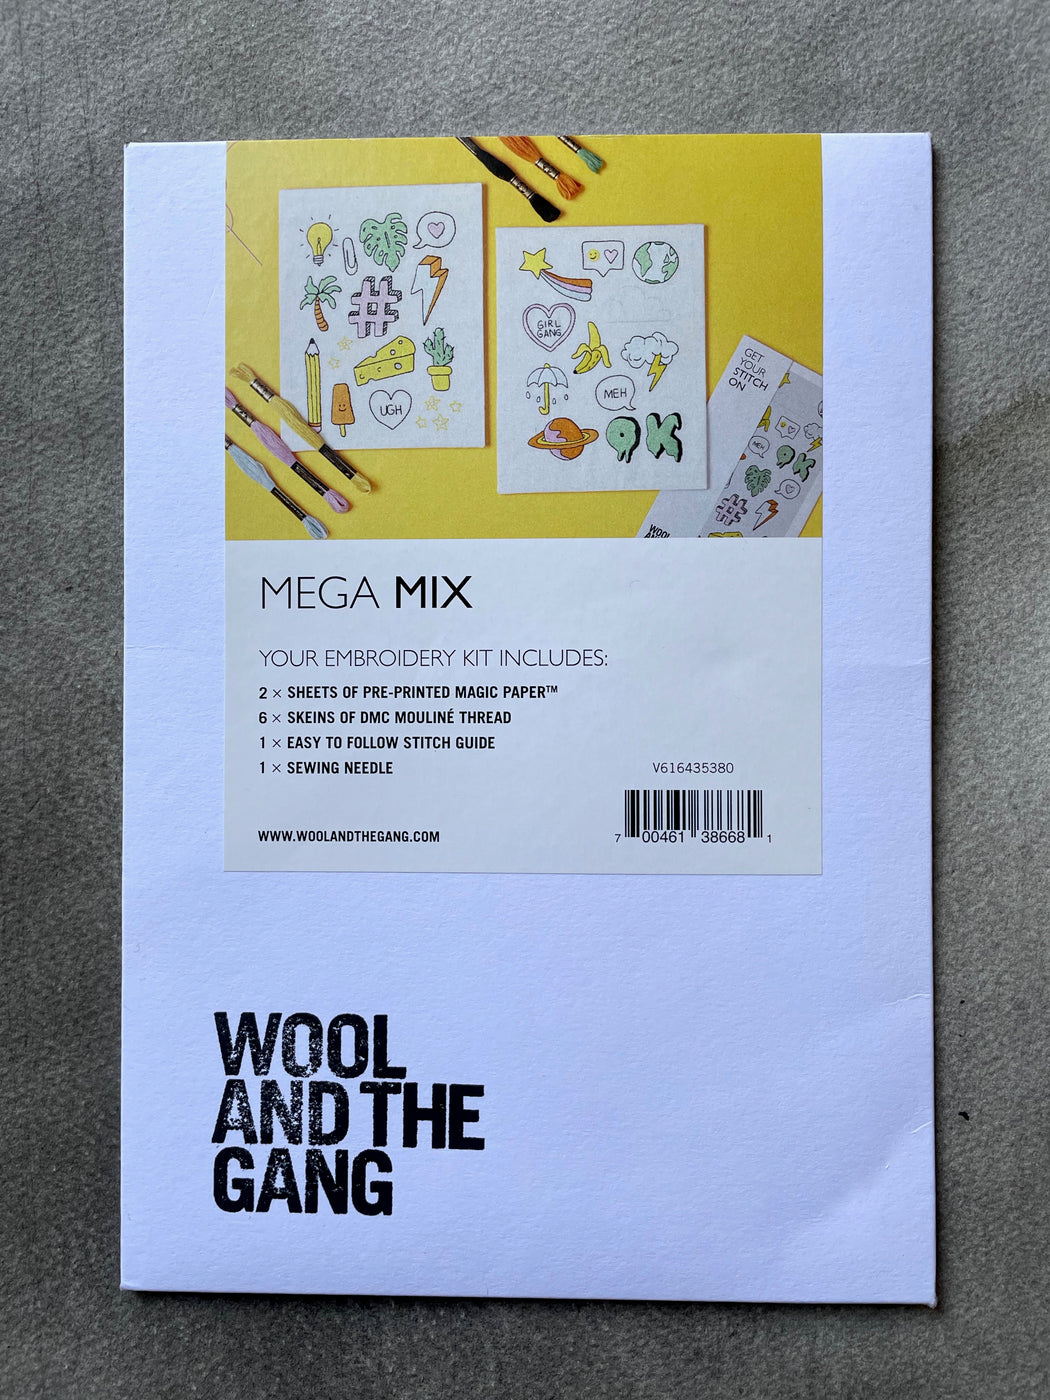 Wool and the Gang "Mega Mix" Embroidery Kit